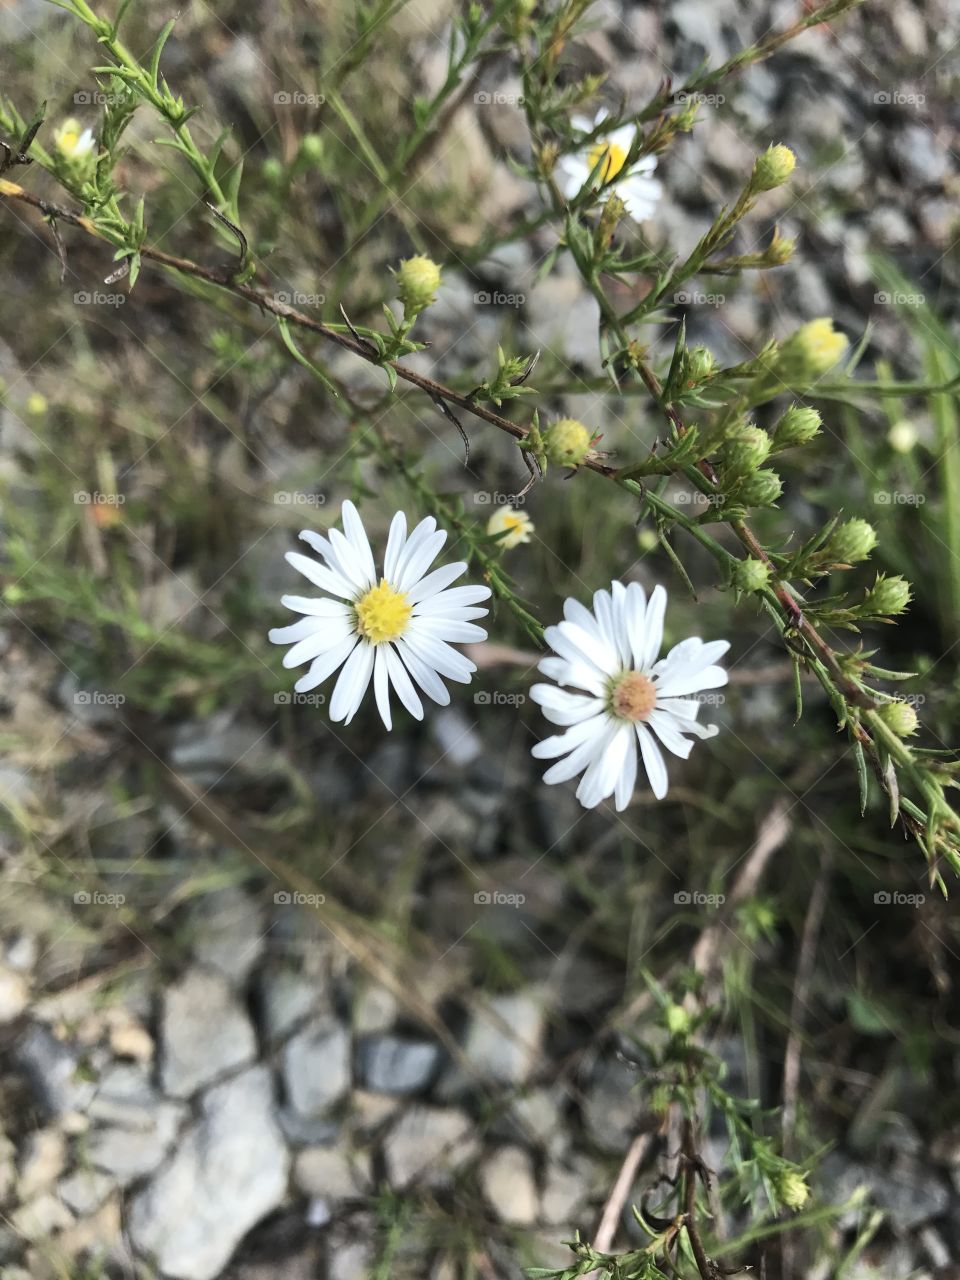 These little white flowers tho